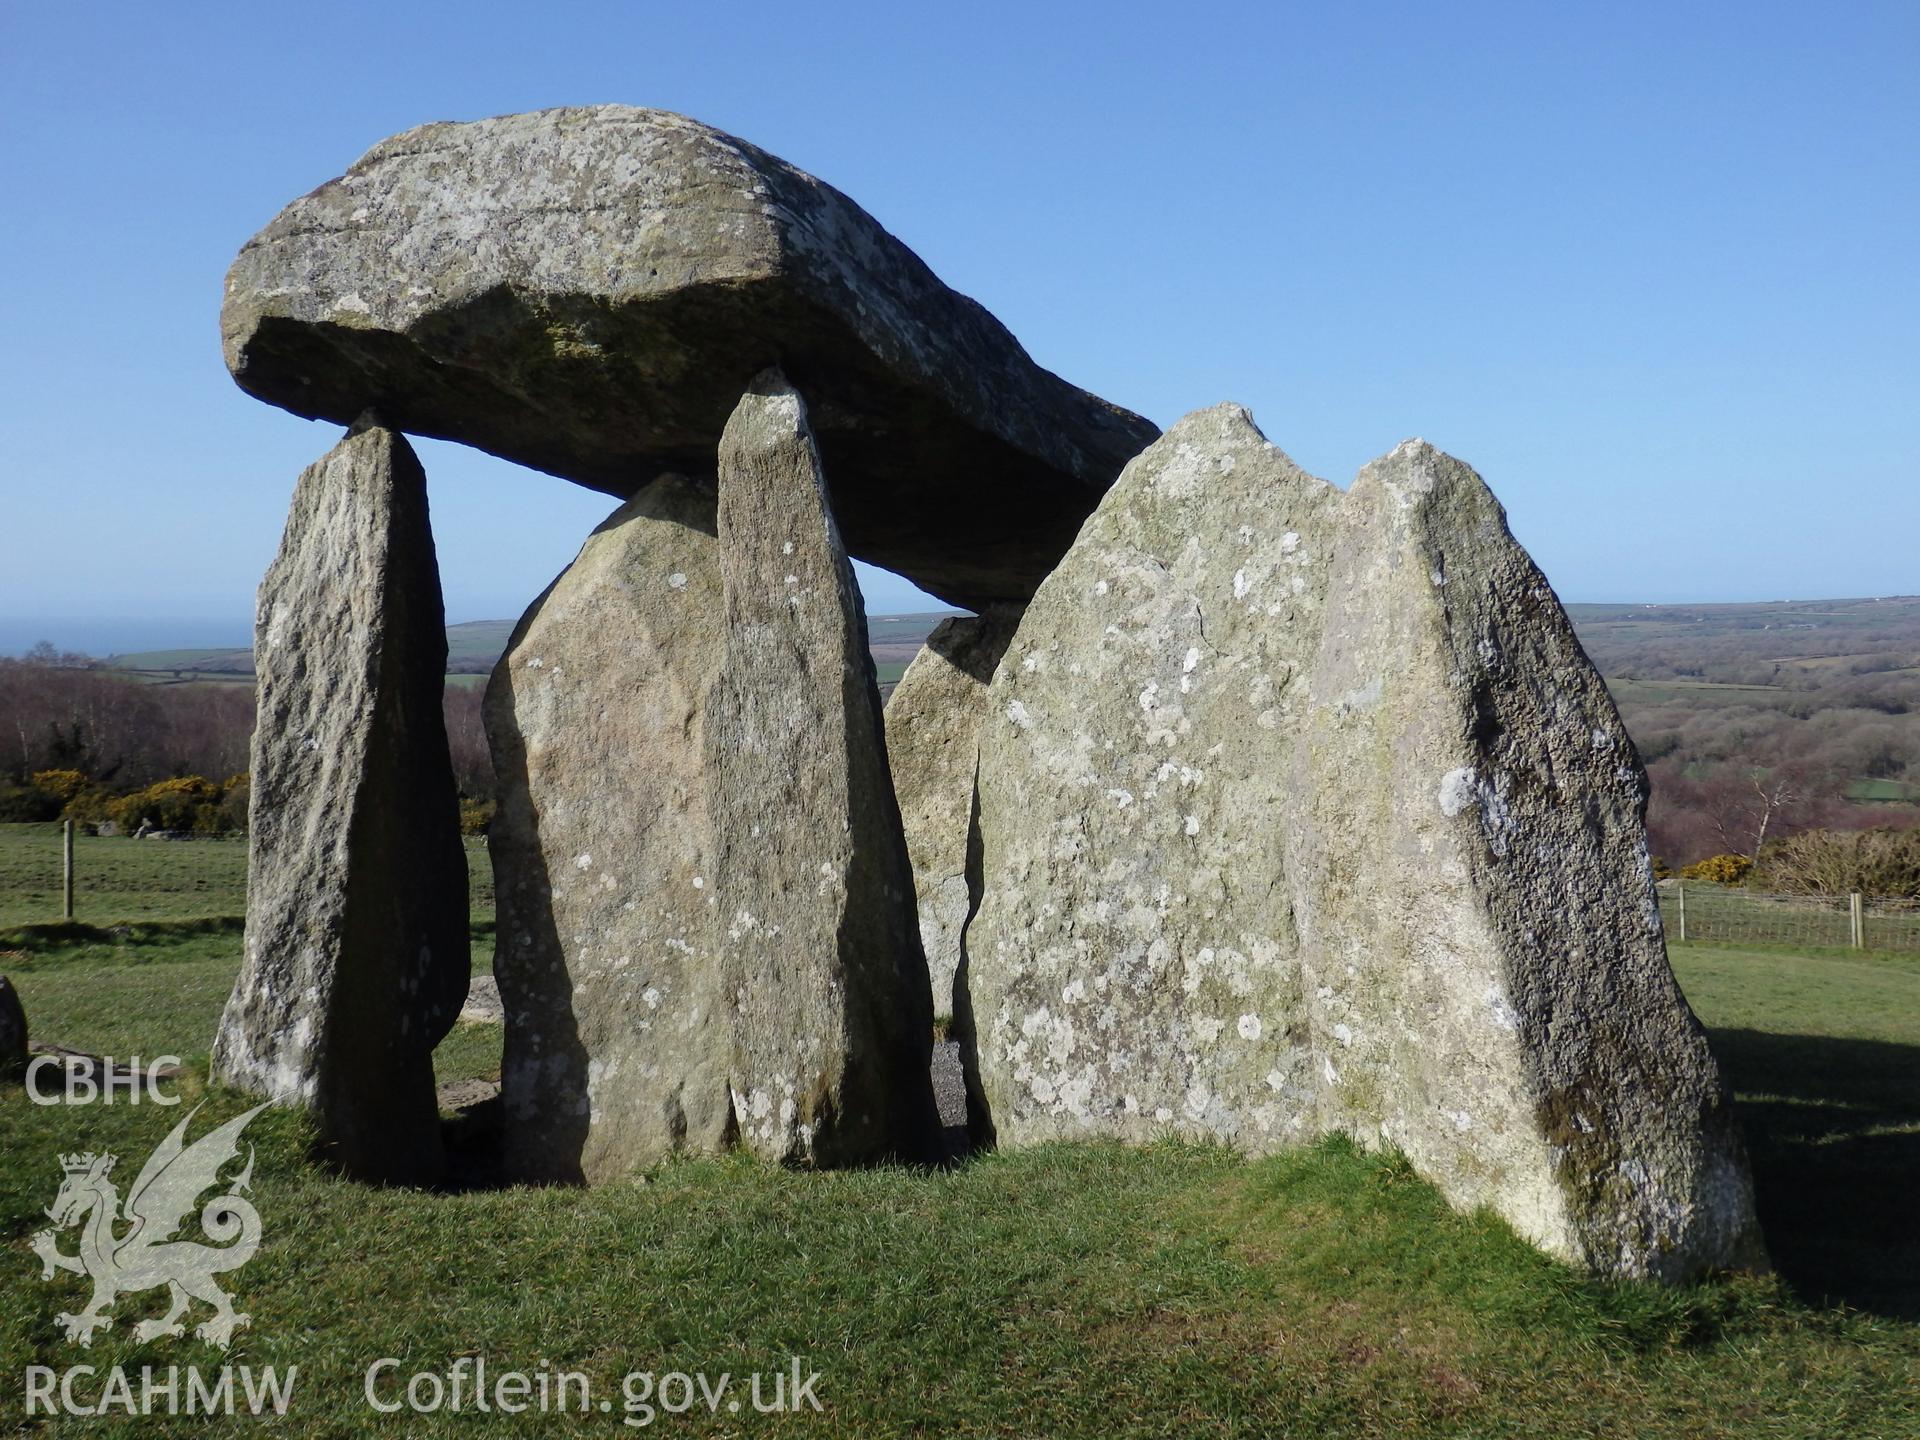 Colour photo showing Pentre Ifan, produced by Paul R. Davis, 10th March 2017.